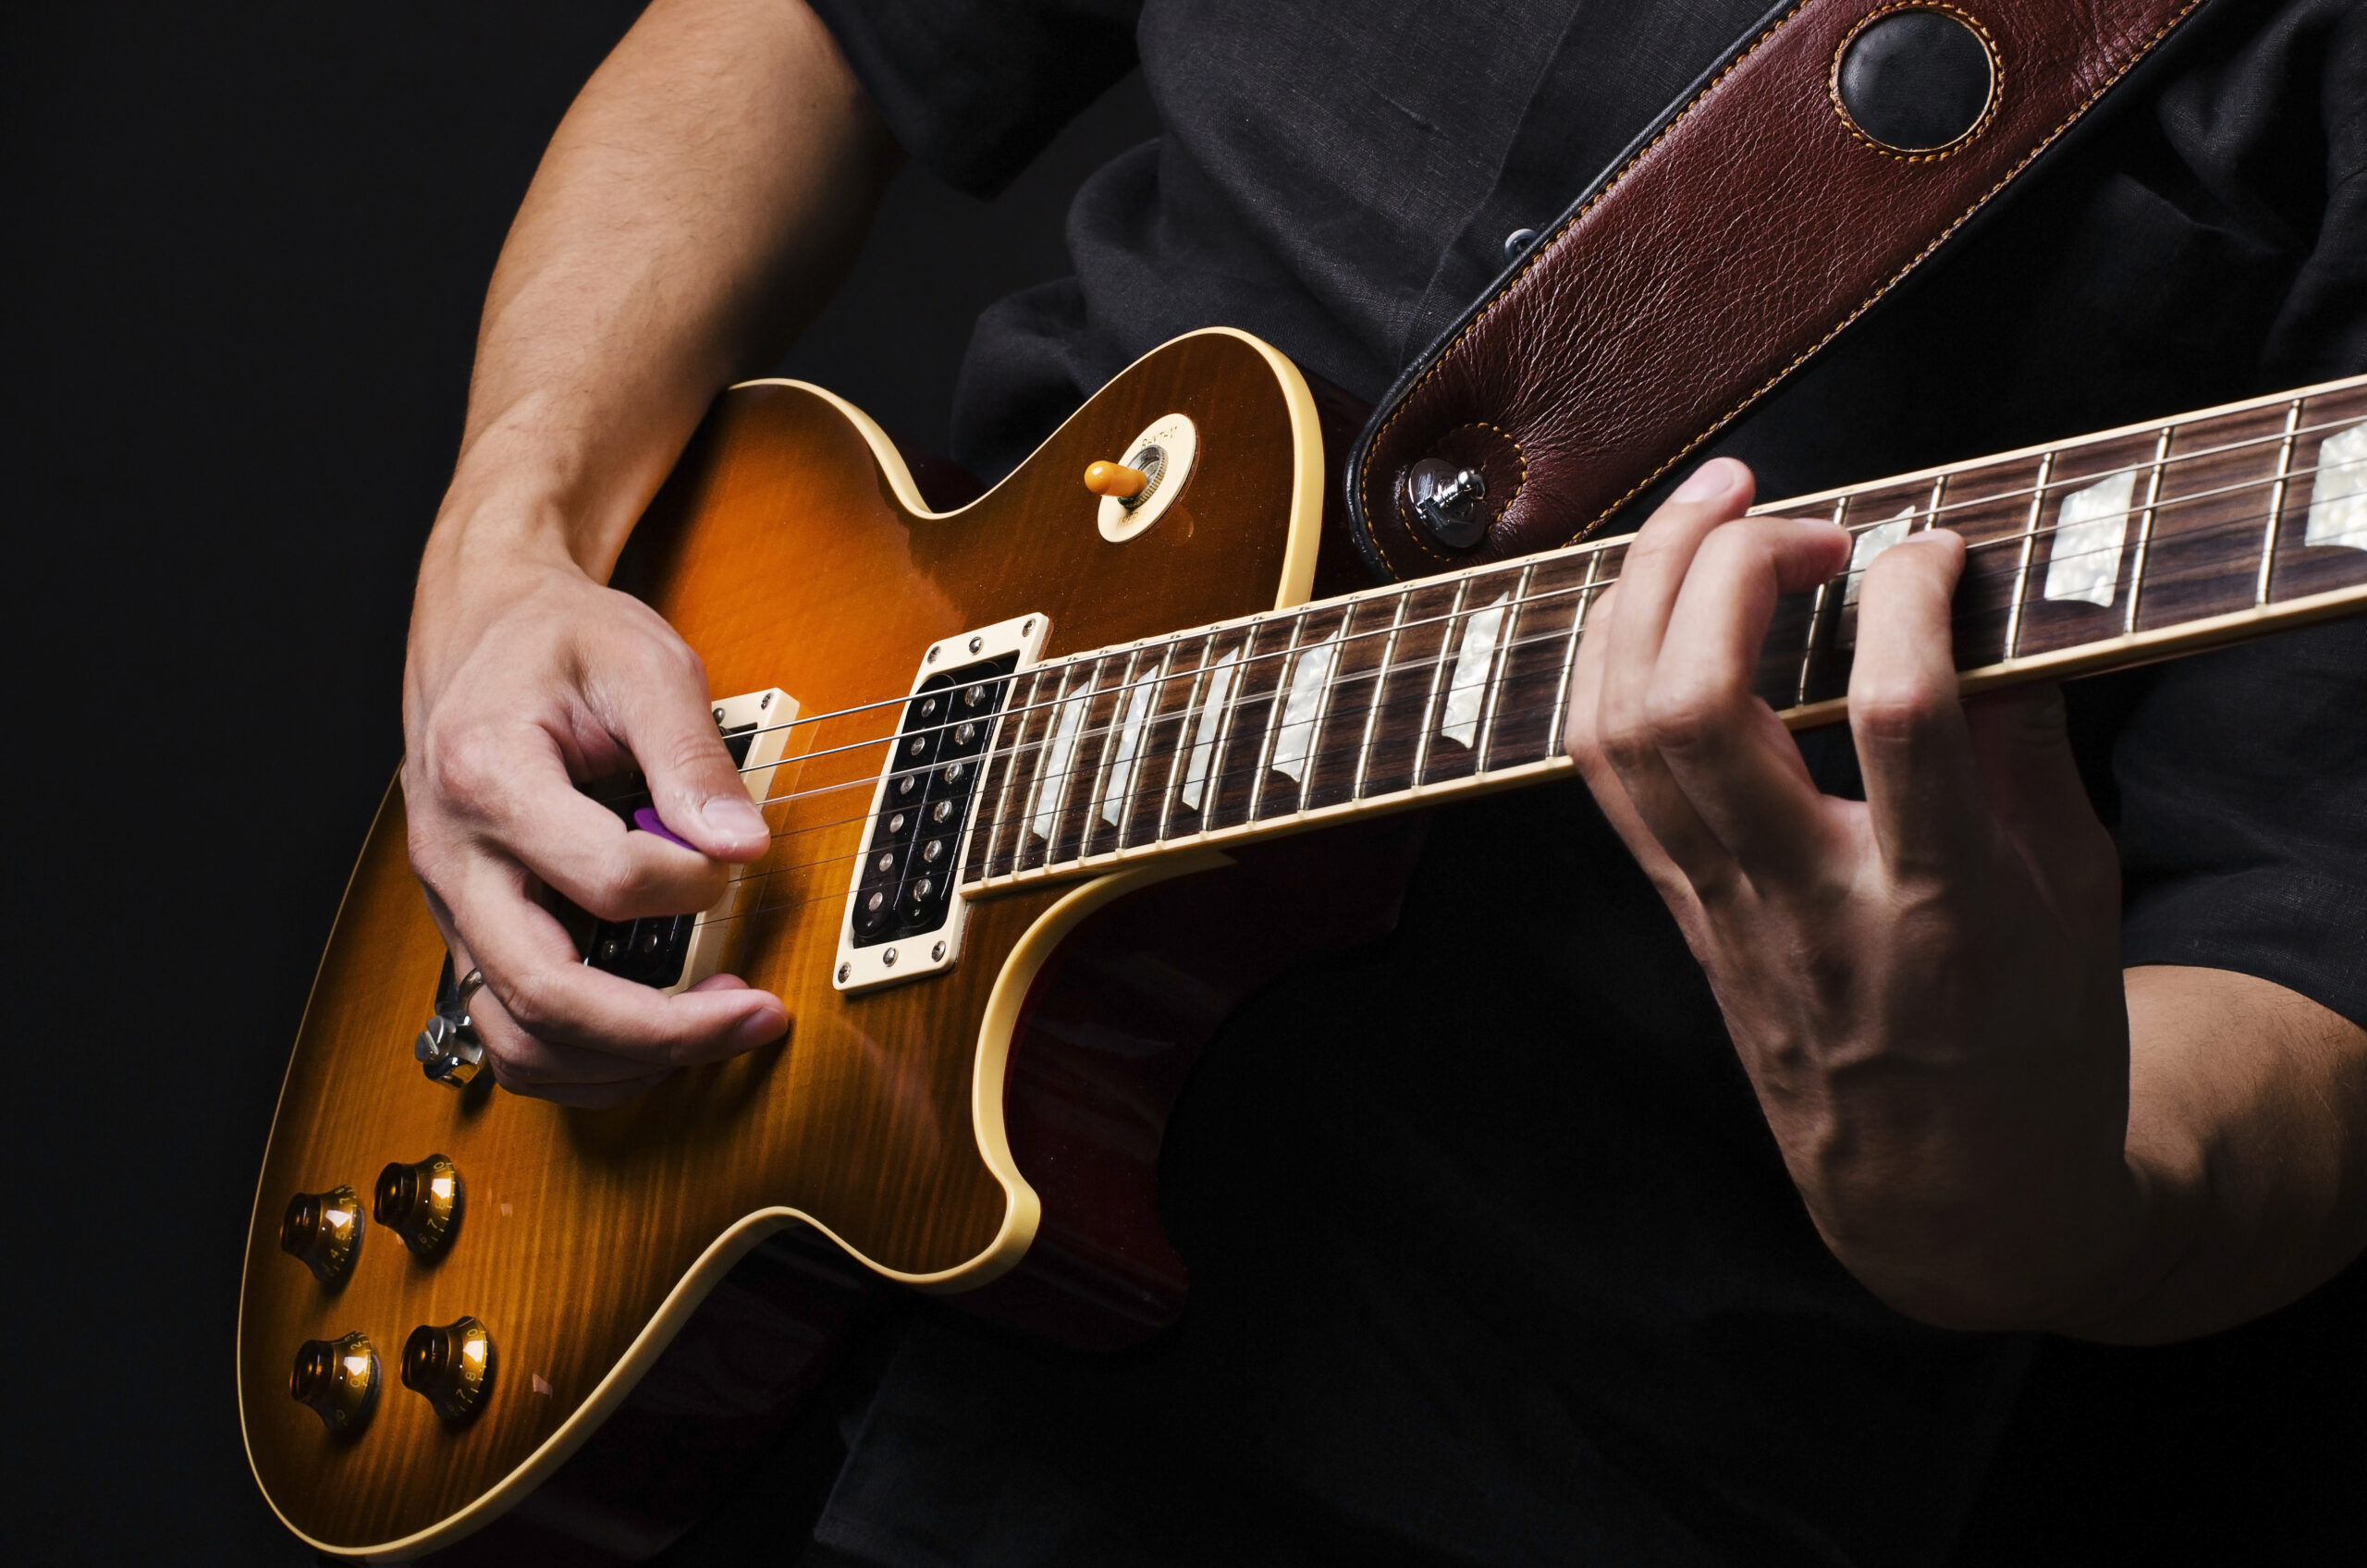 Top Things To Keep In Mind While Buying A New Guitar